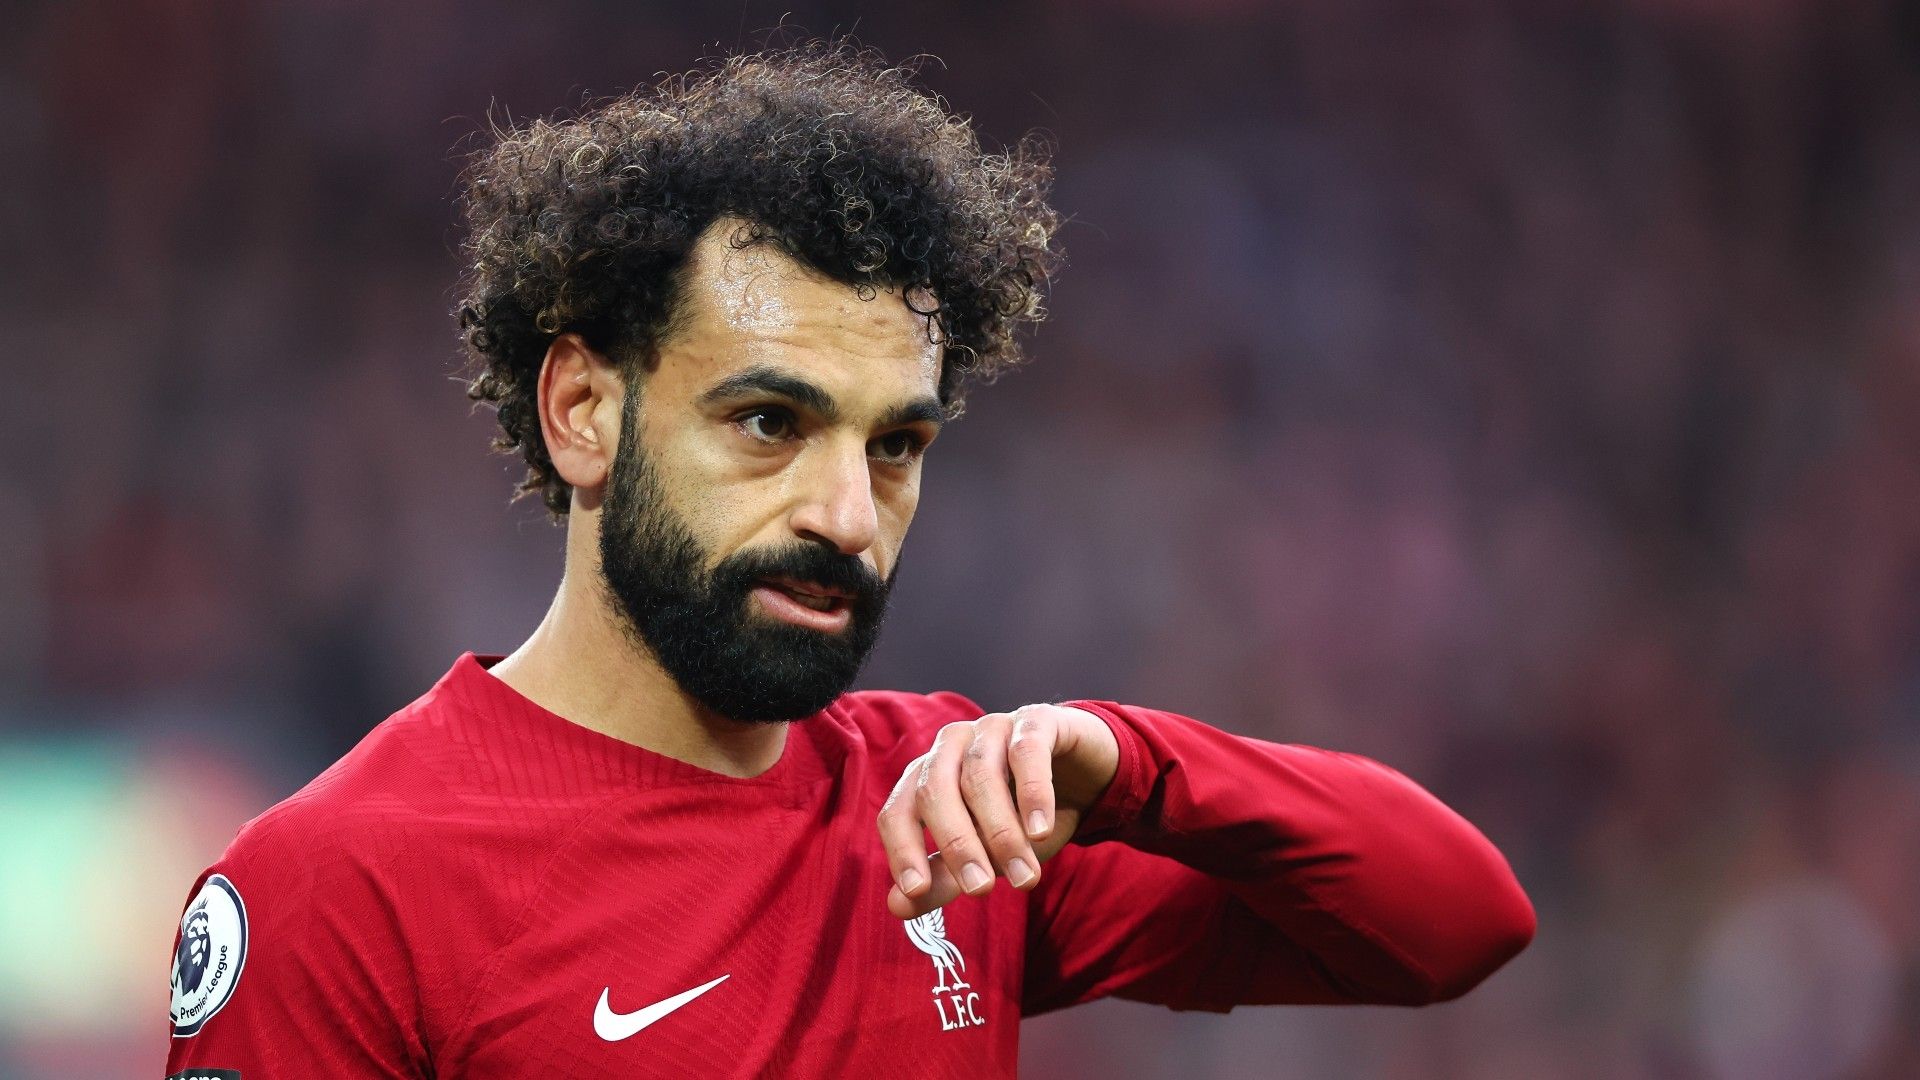 Liverpool legend names the one player whose departure would be a 'bigger blow' than Salah - Player Profile